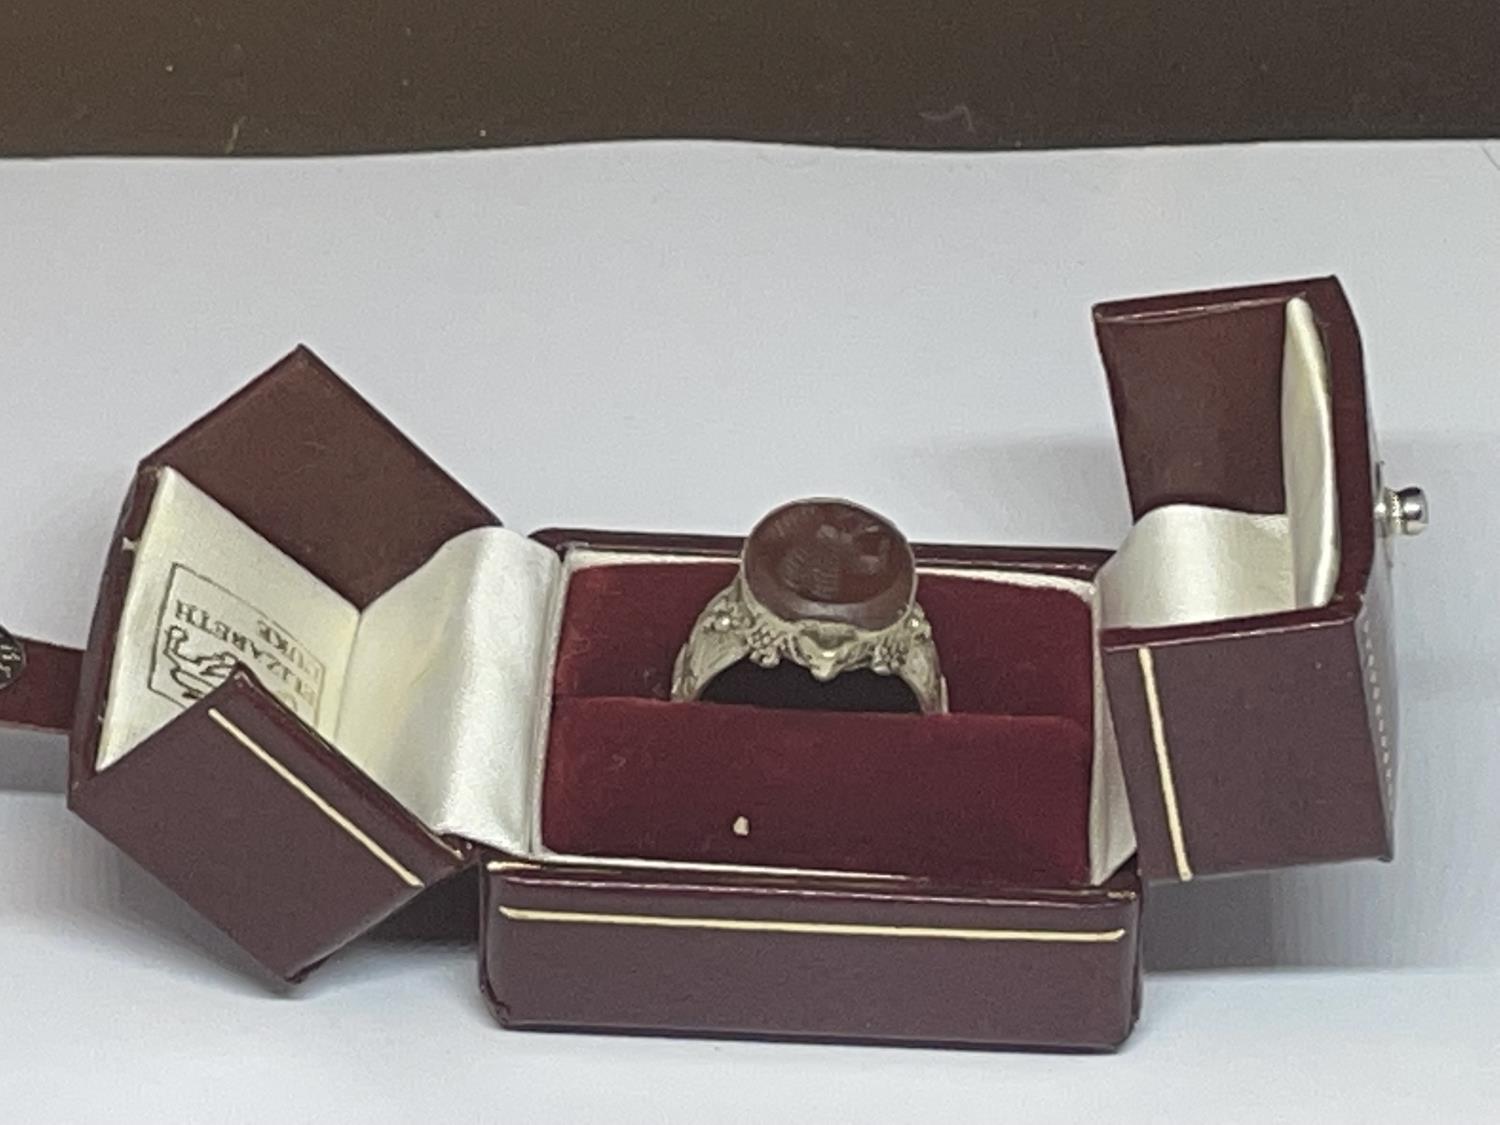 A MARKED SILVER RING WITH A TURTLE DESIGN SEAL INA PRESENTATION BOX - Image 5 of 5